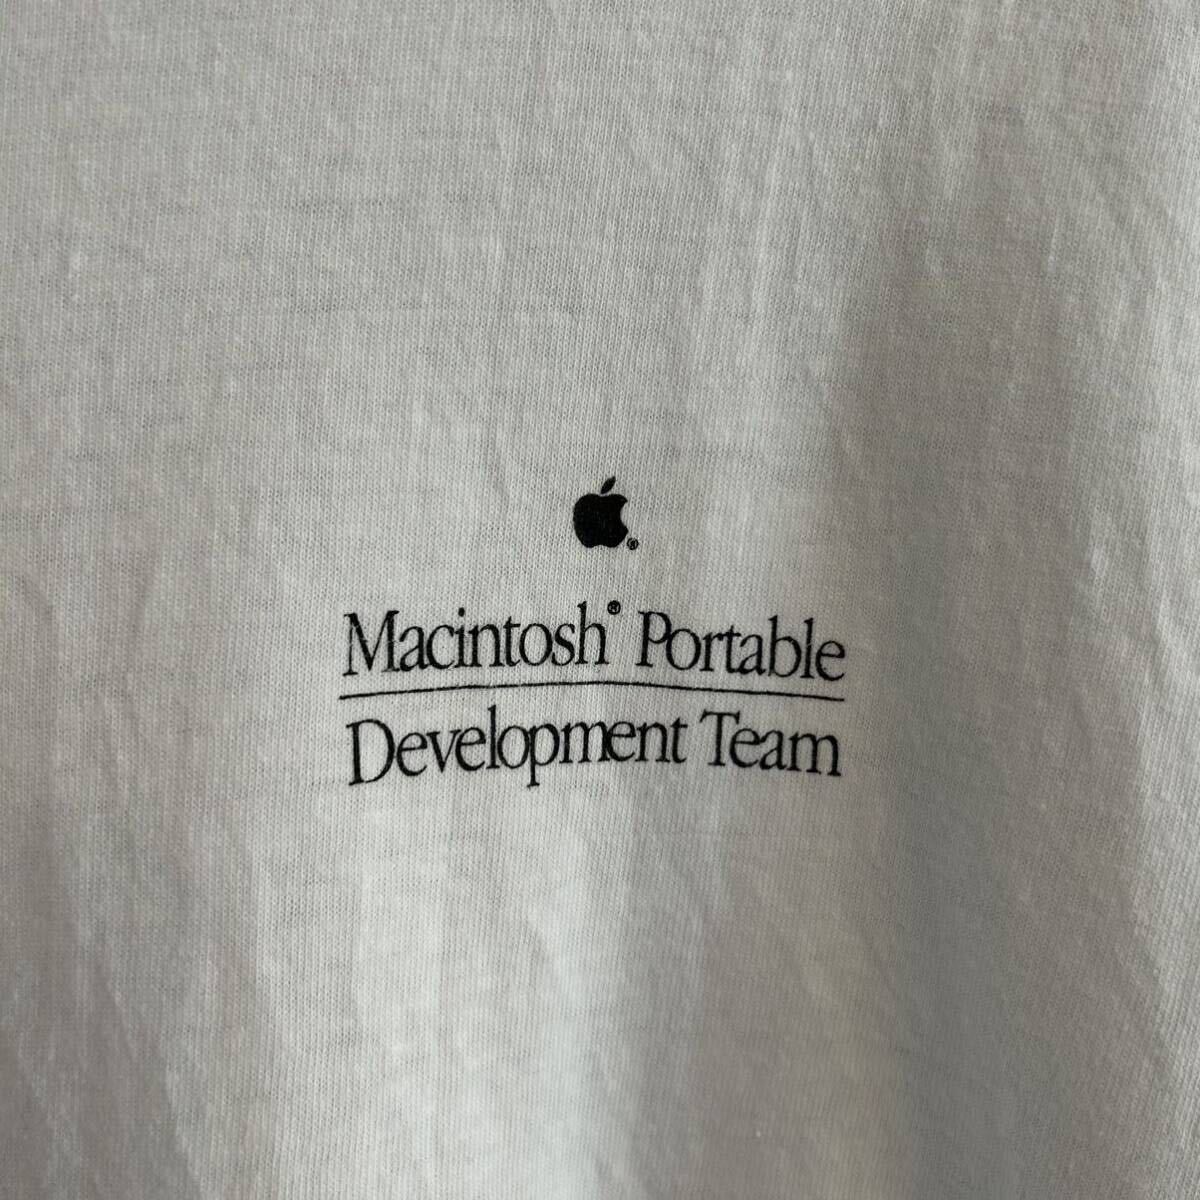 Apple VINTAGE T-shirt XL size Vintage promo enterprise Apple personal computer old clothes 90s USA made tee shirt